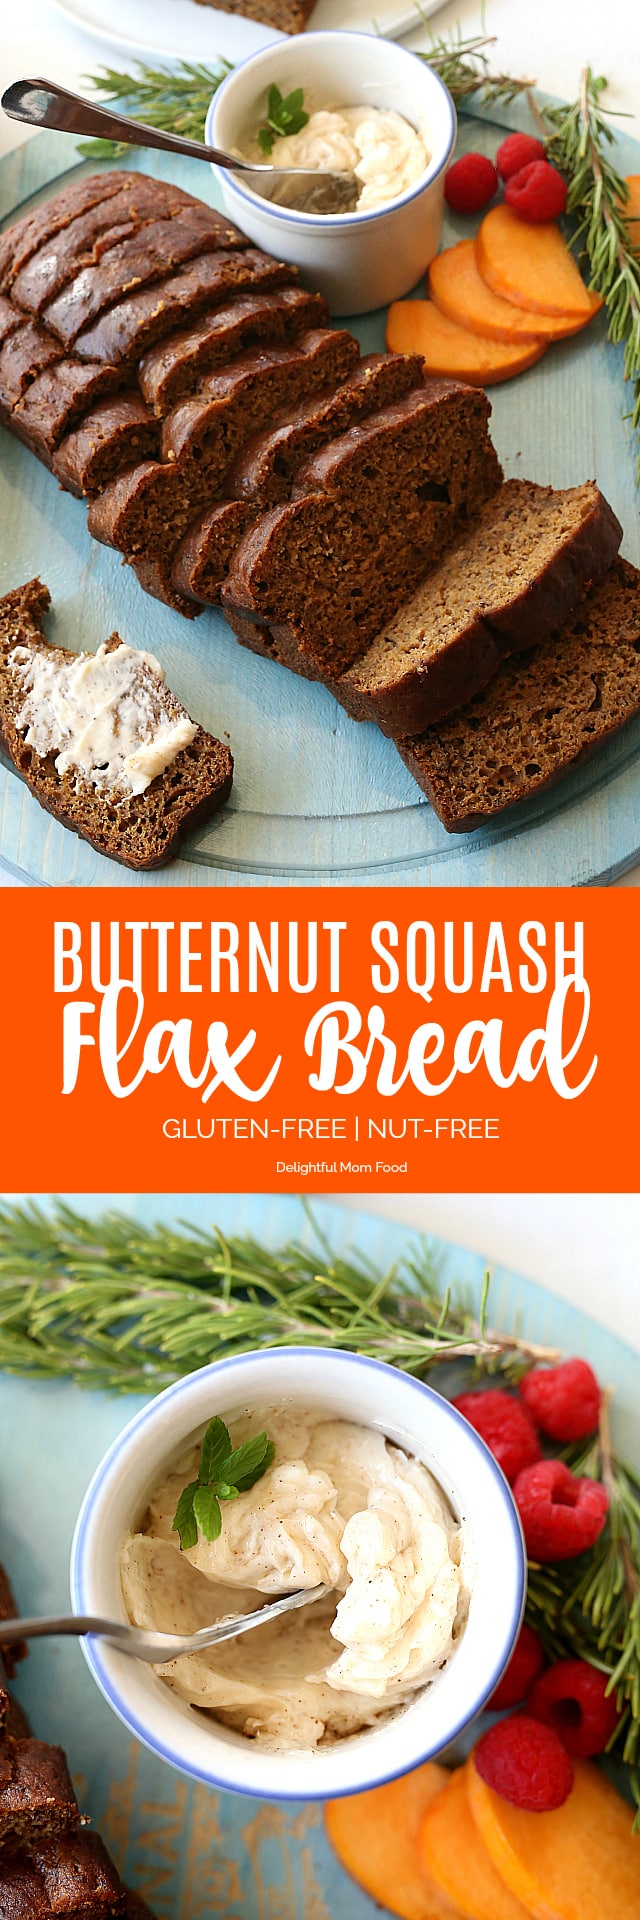 Butternut squash flax bread is so warm, moist and delicious without any dairy or added oils! A new healthy holiday favorite bread loaf to bring to the table!